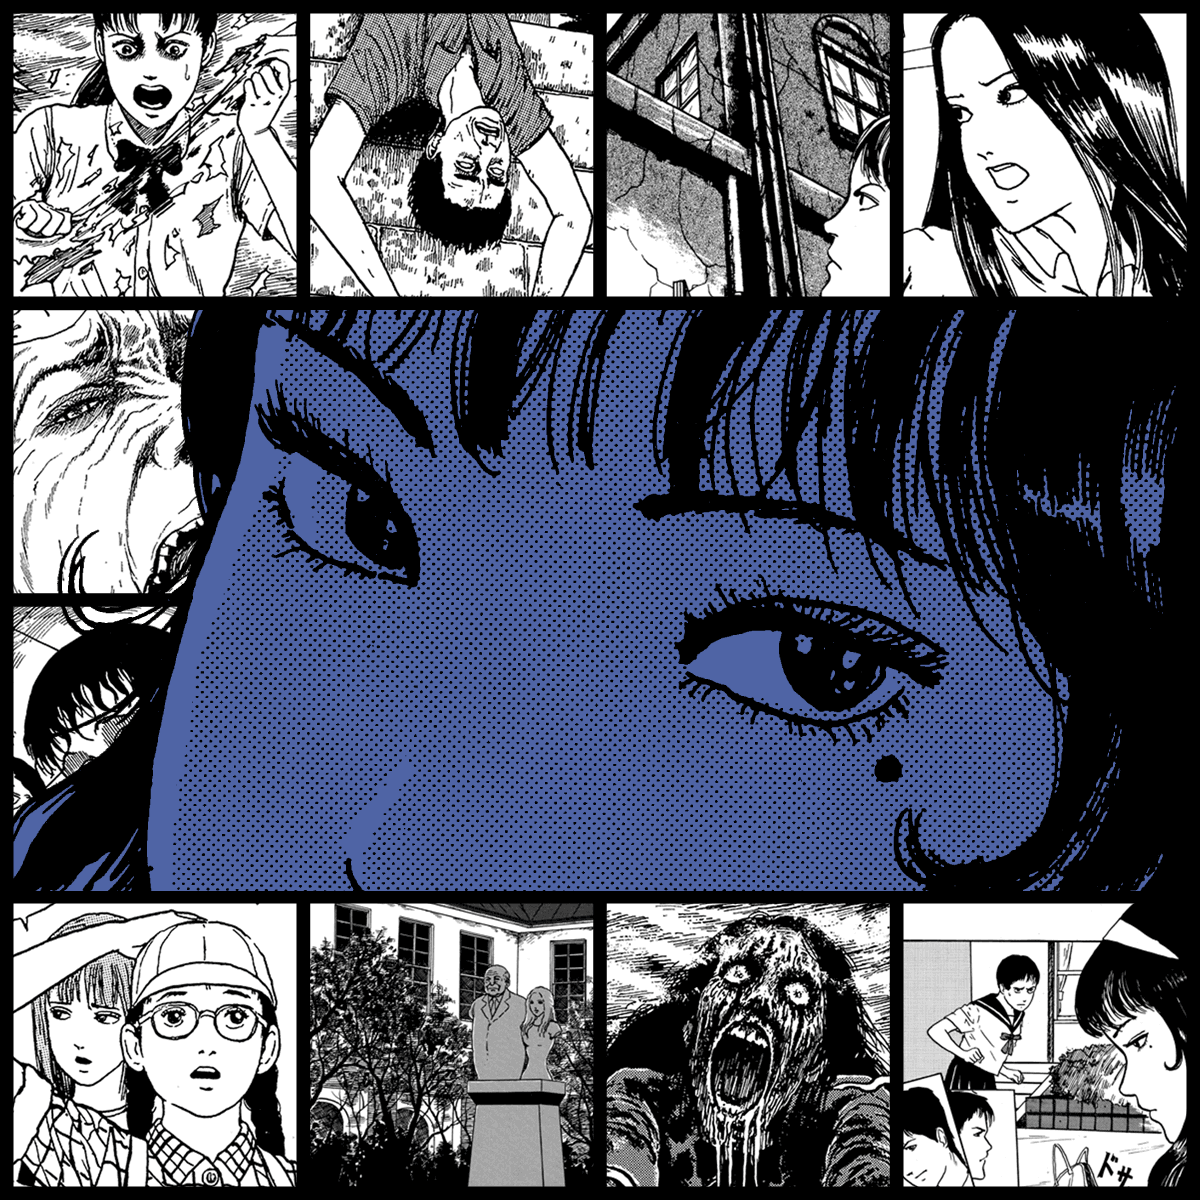 TOMIE by Junji Ito #2172